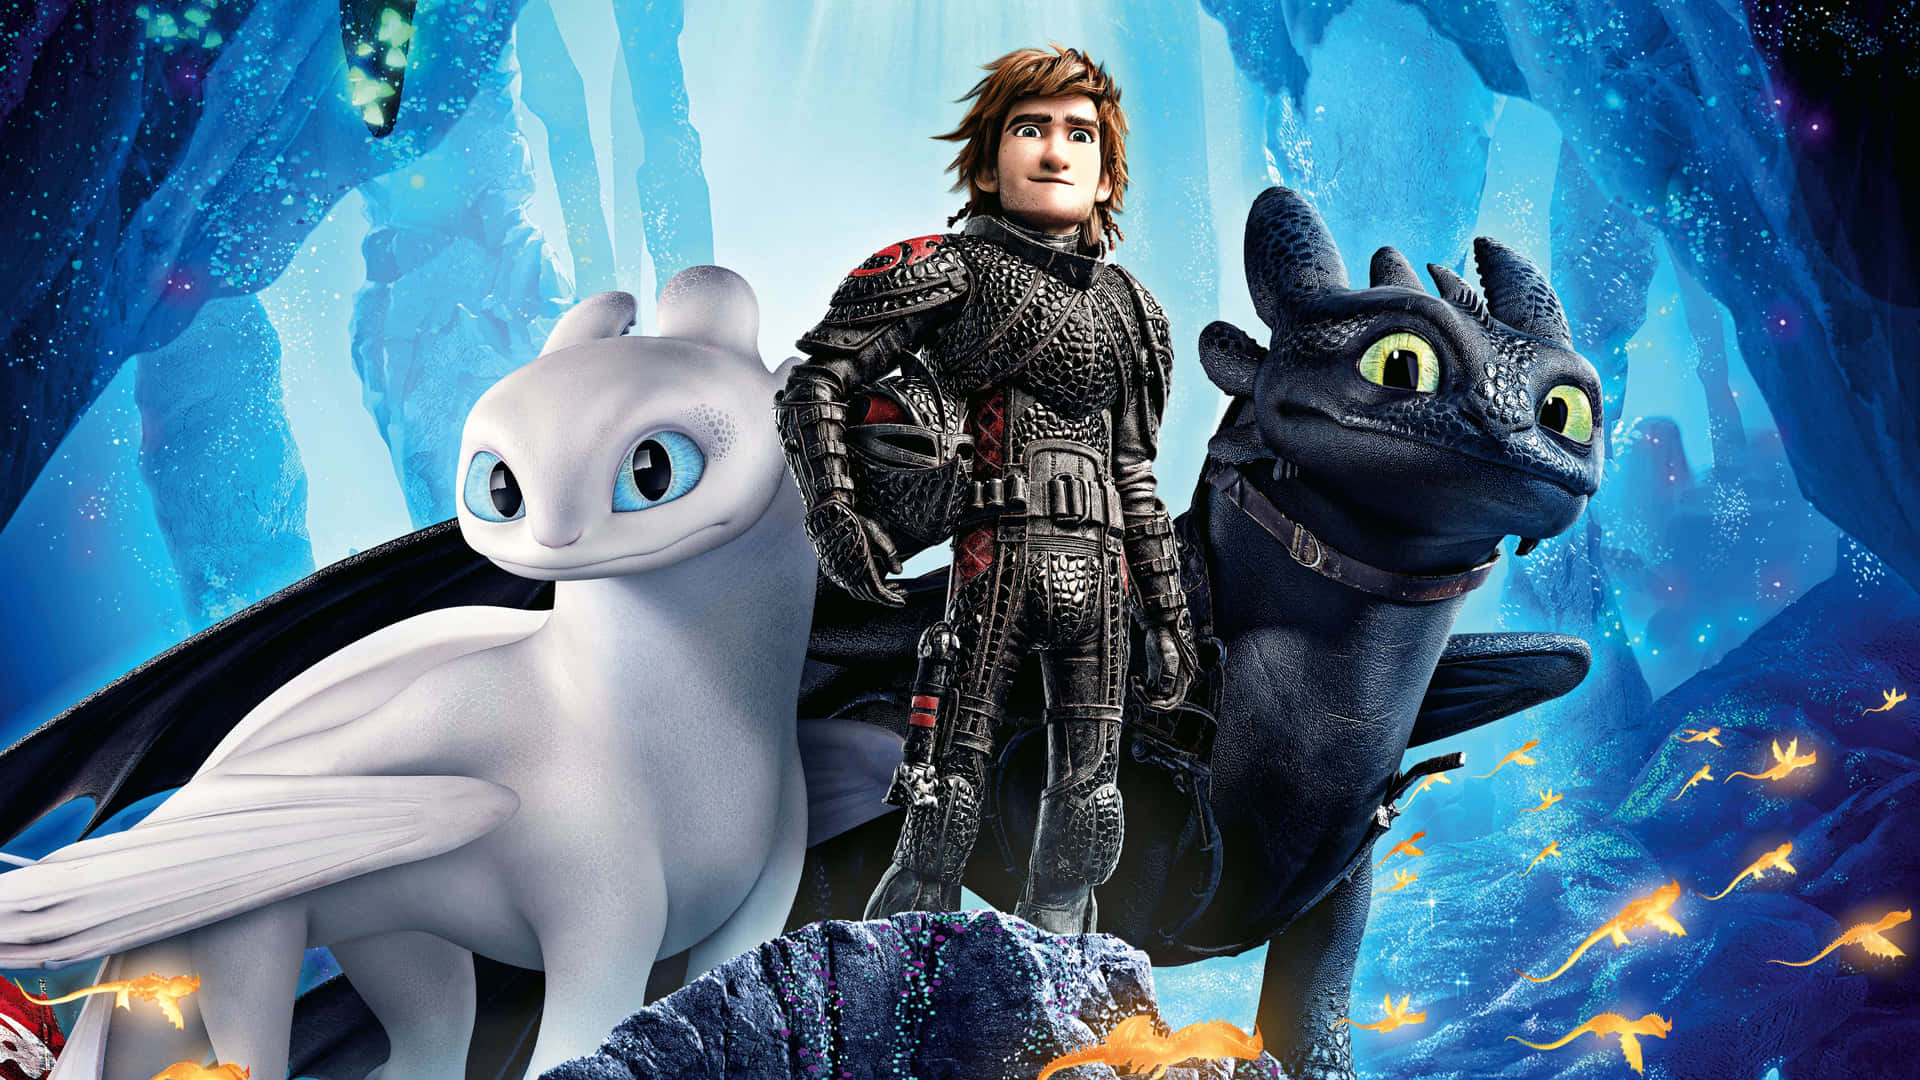 Feel the adventure on this new epic journey with How to Train Your Dragon 4K Wallpaper